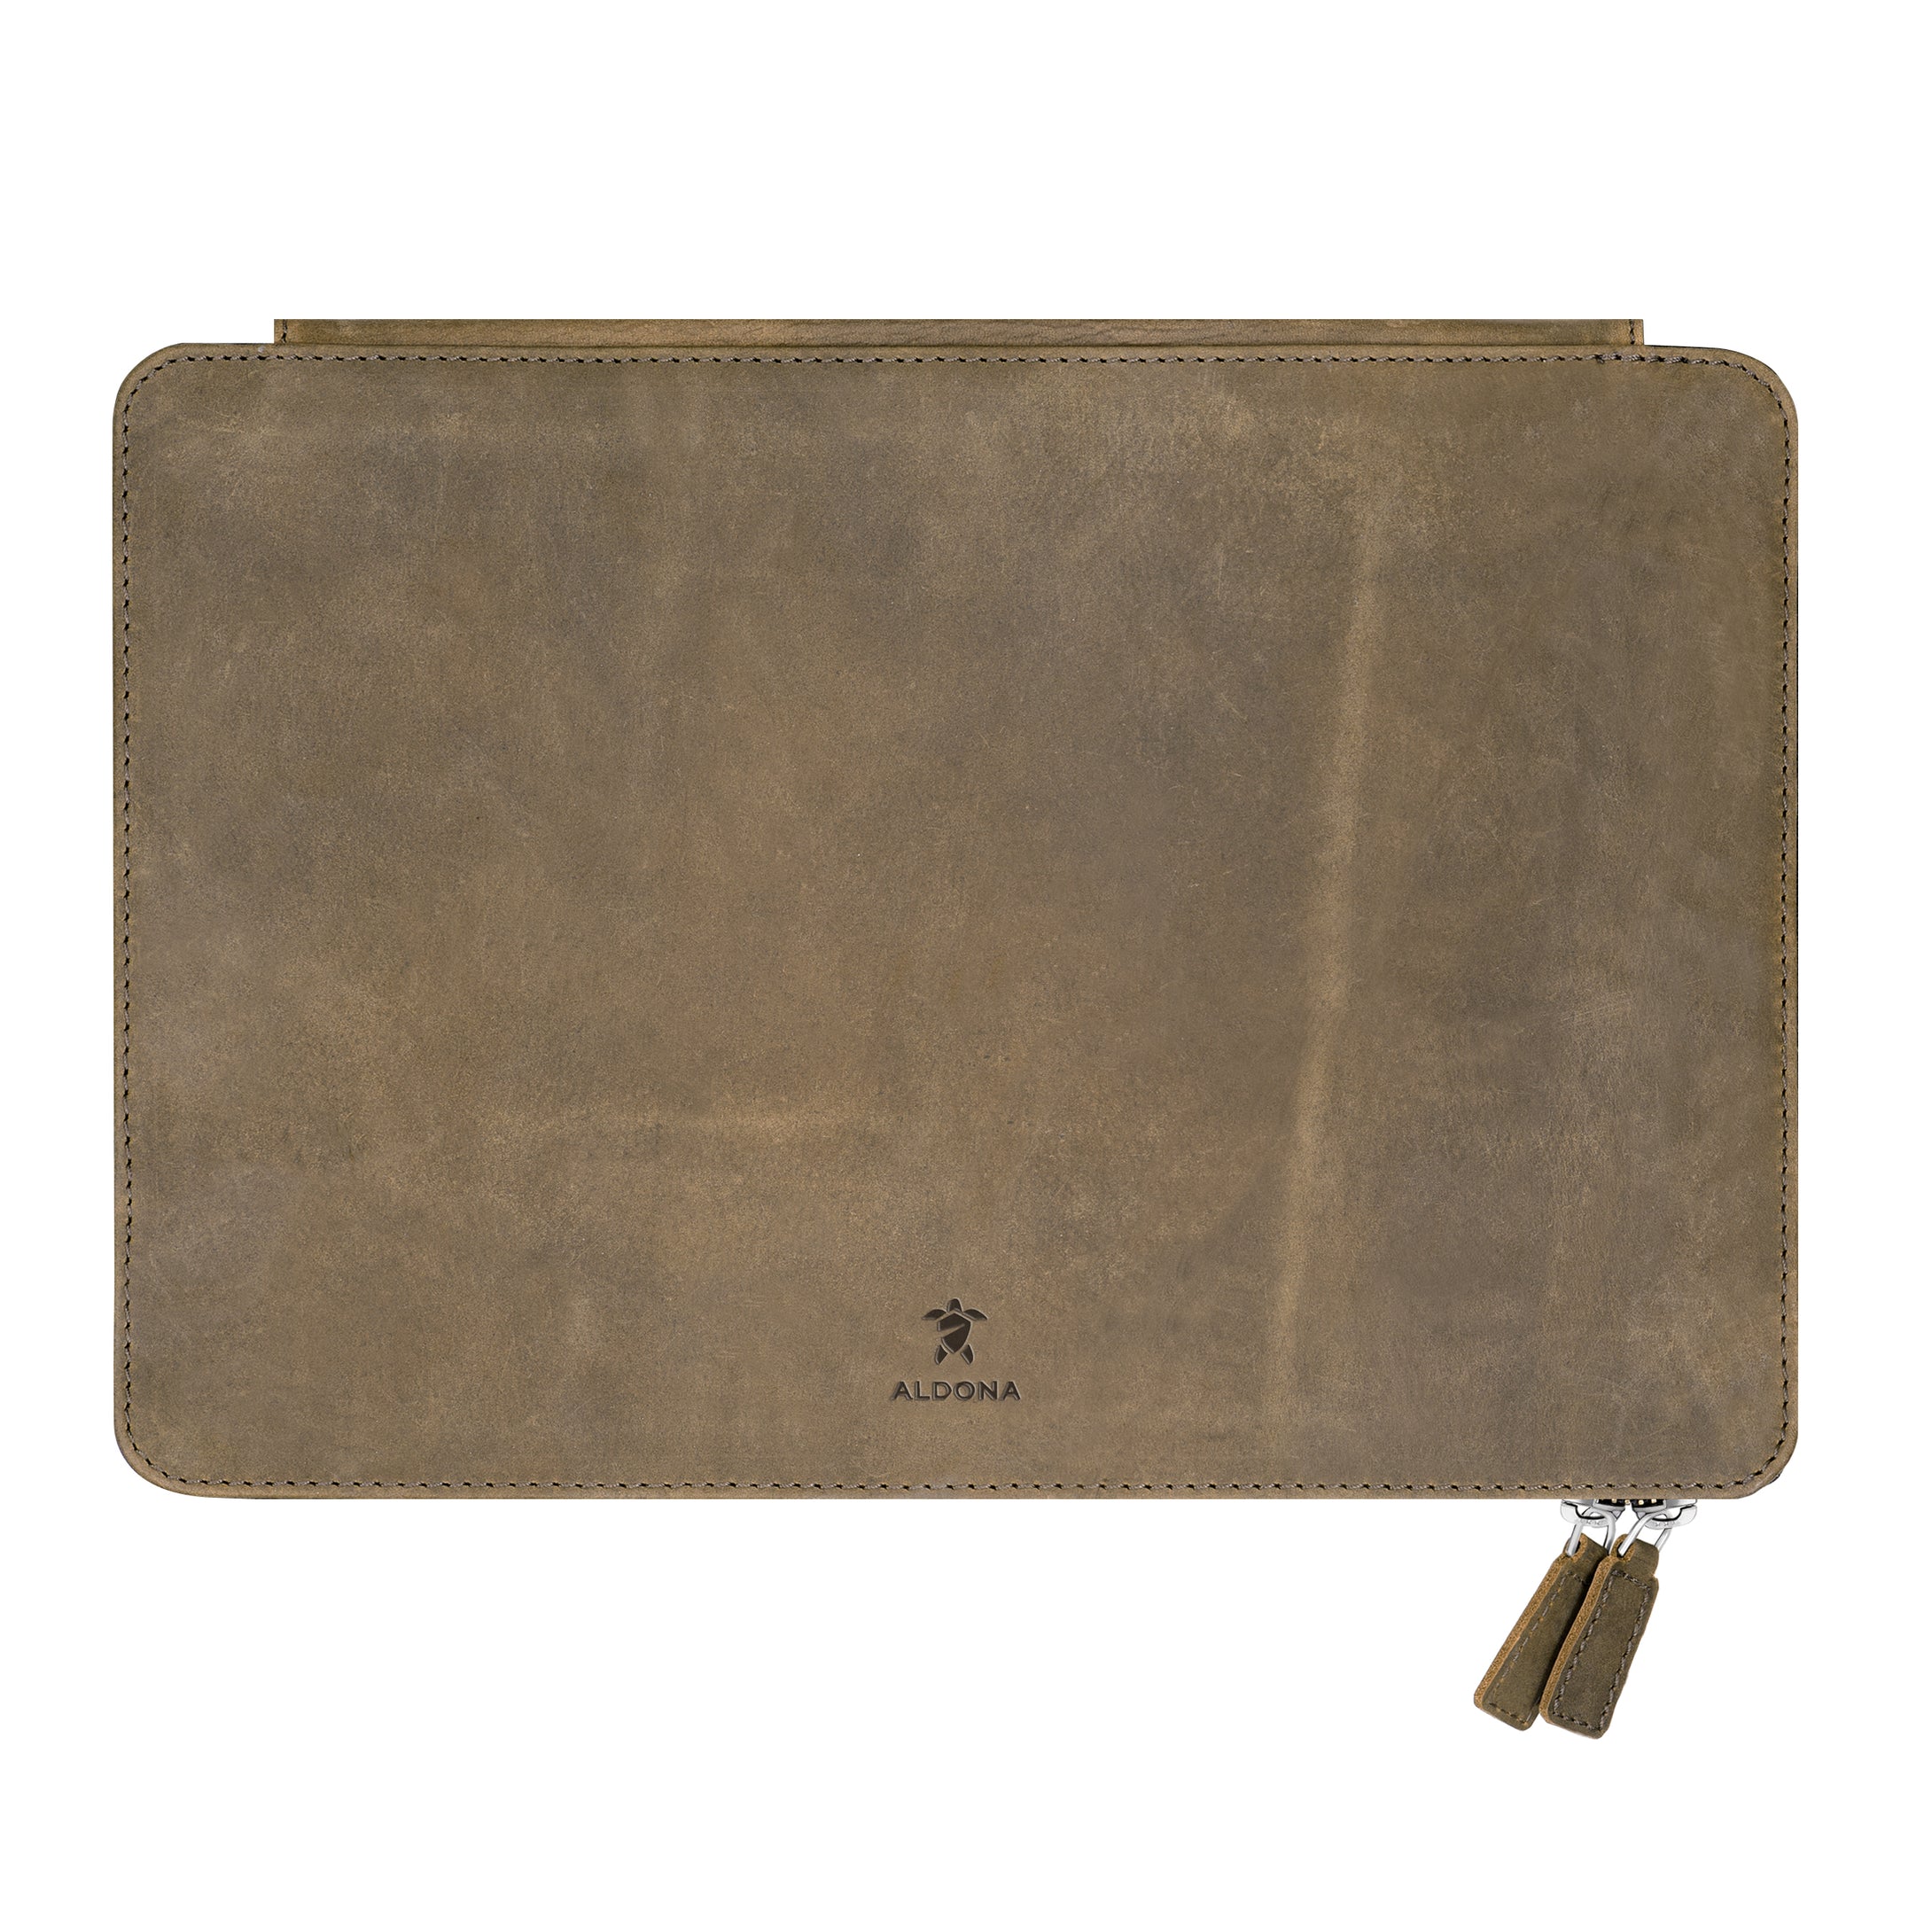 Megaleio Leather Sleeve for 13.3 Inch MacBook Air - Burnt Tobacco Colour